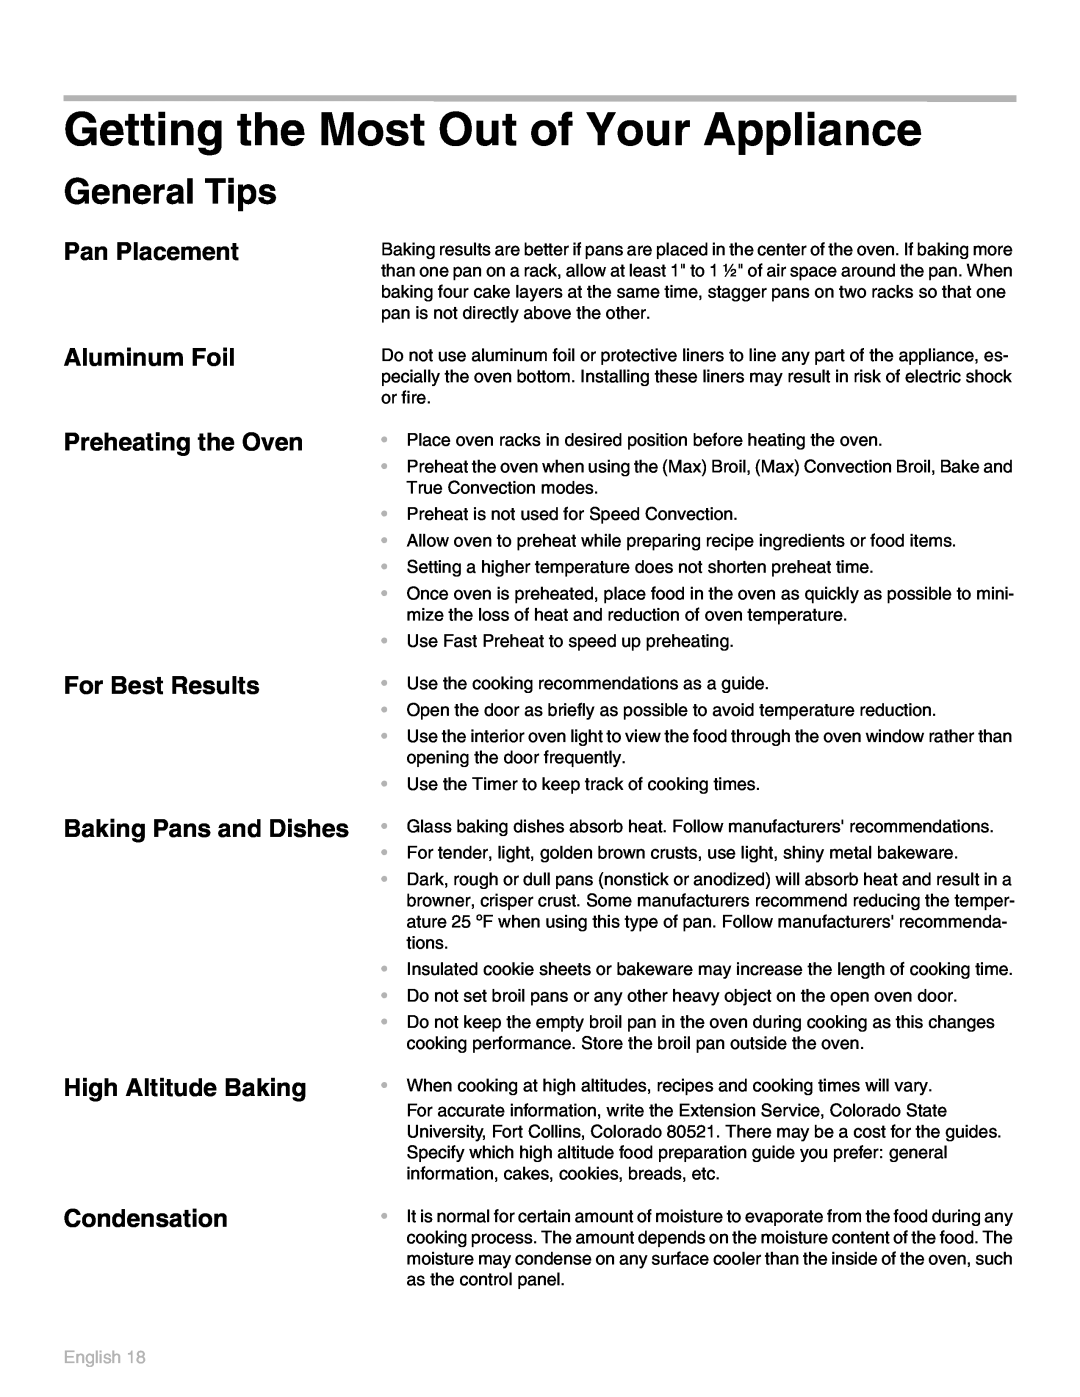 Thermador POD 302 manual Getting the Most Out of Your Appliance, General Tips, English 